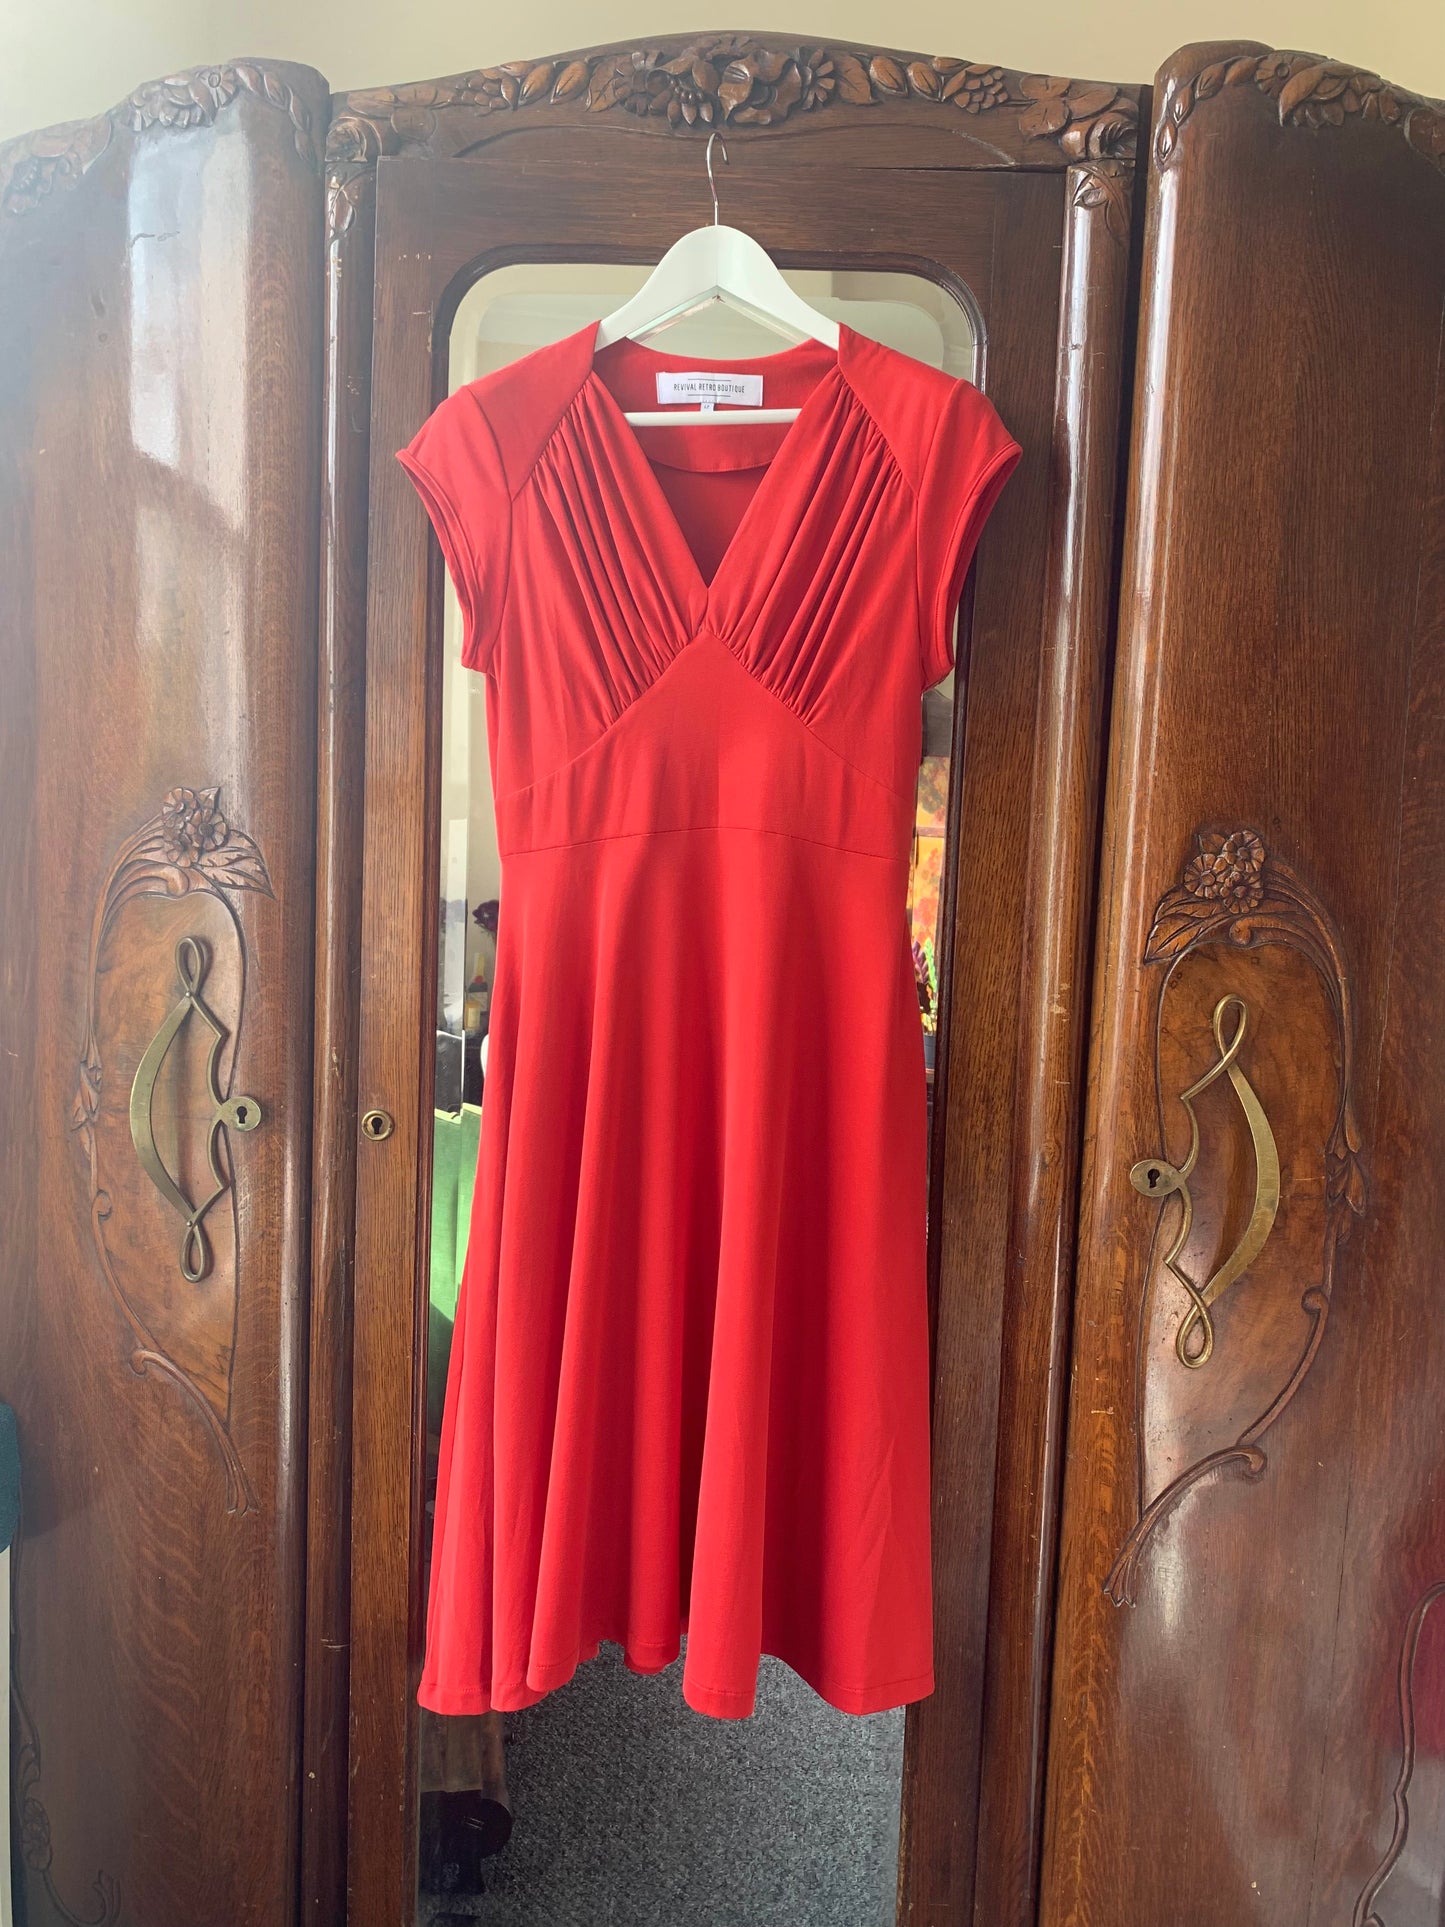 SAMPLE Piccadilly Dress red stretch Jersey 12-14